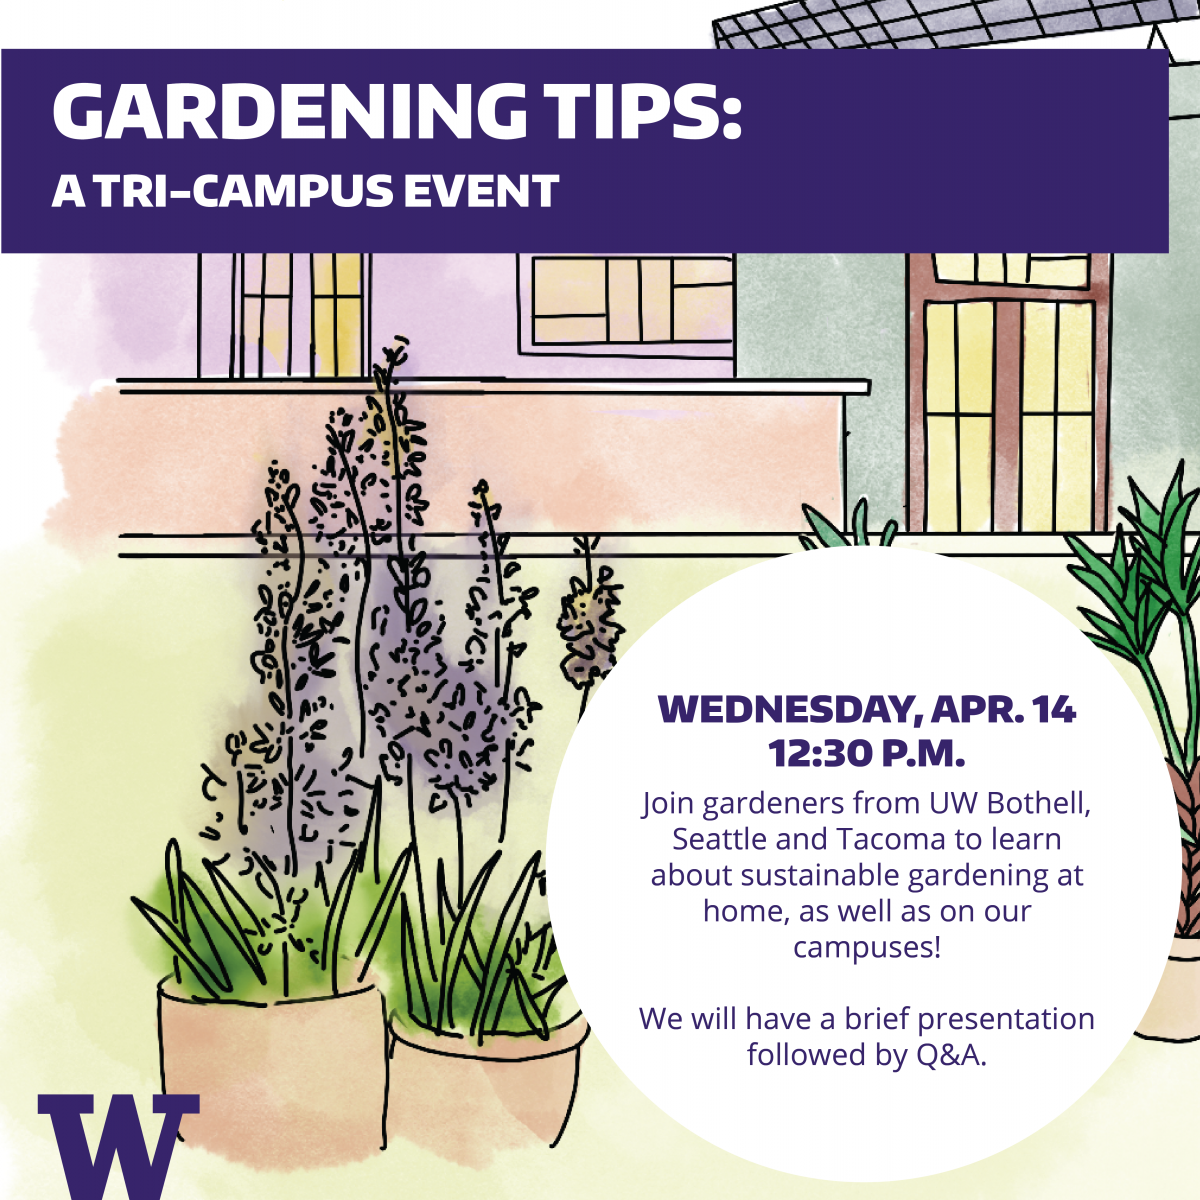 Gardening at home event flyer